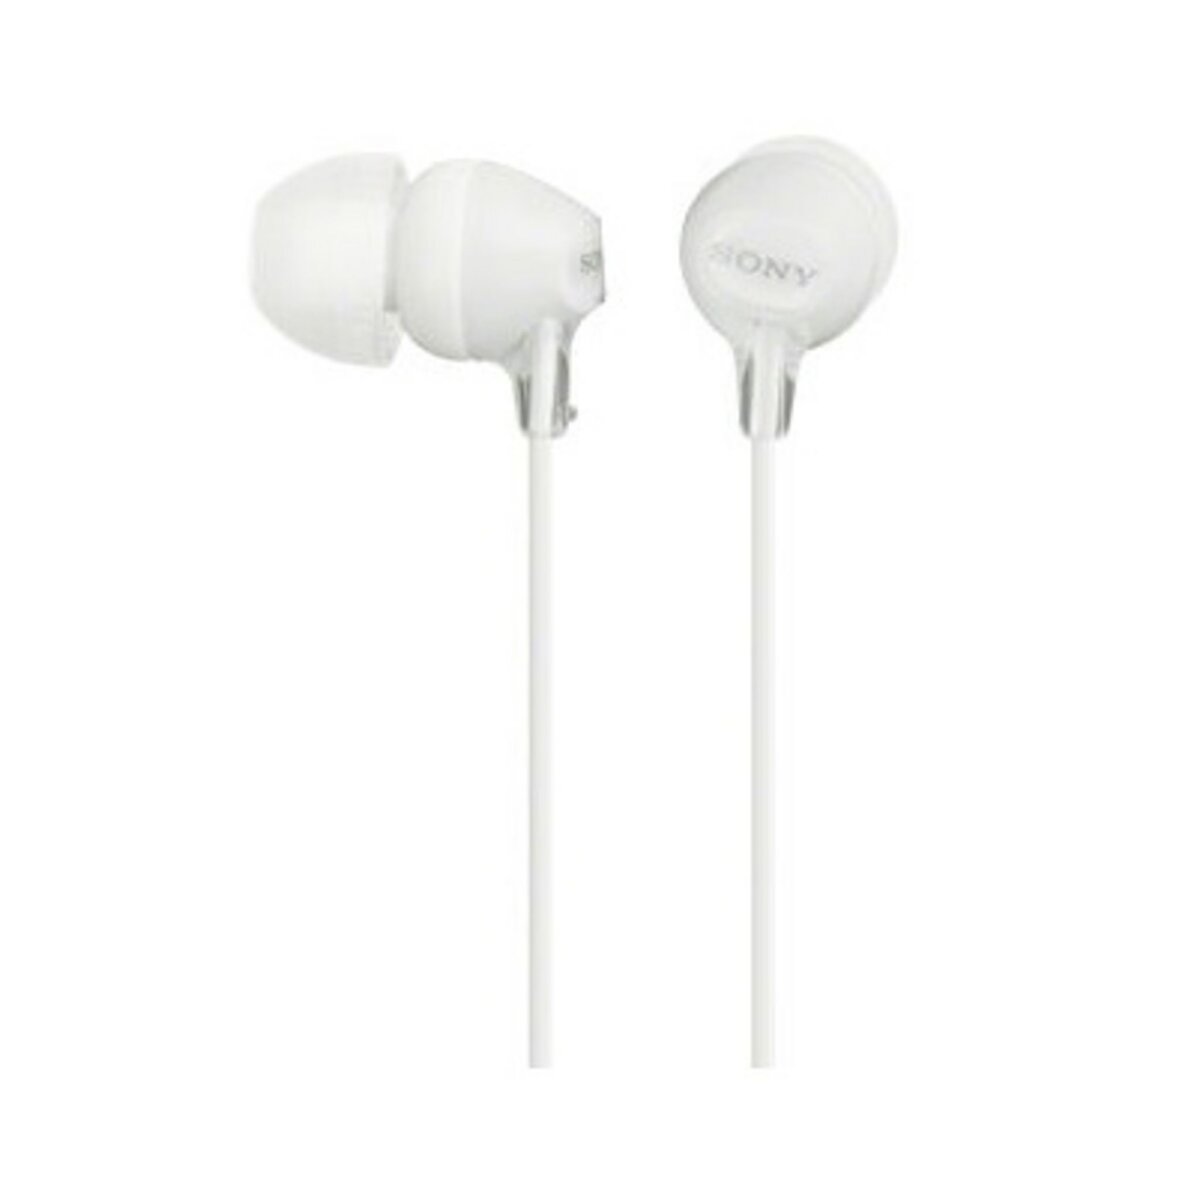 SONY Écouteurs - Blanc - MDR-EX15